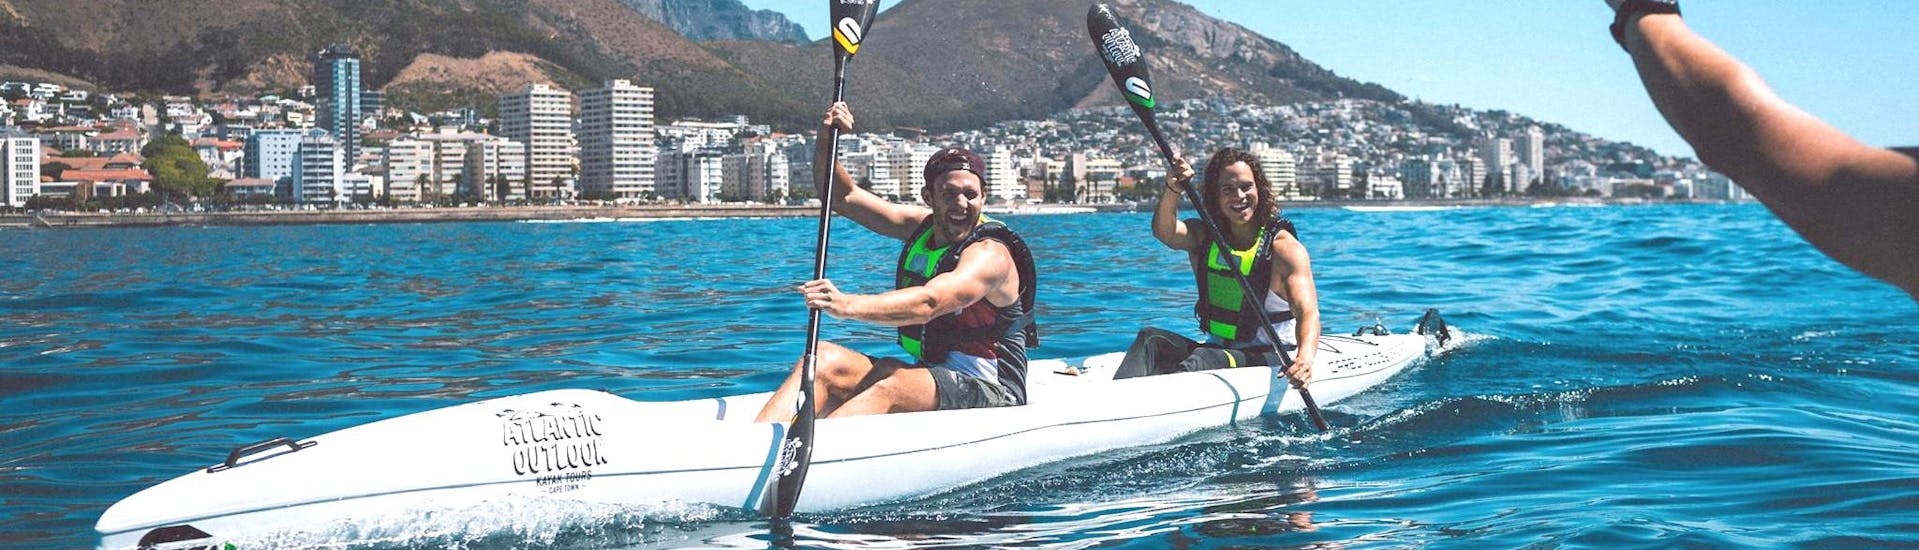 During the Adventure on Sea Kayak in Cape Town, two kayakers are having fun along the Atlantic Sea Board coastline with a their professional kayak guide from Atlantic Outlook.